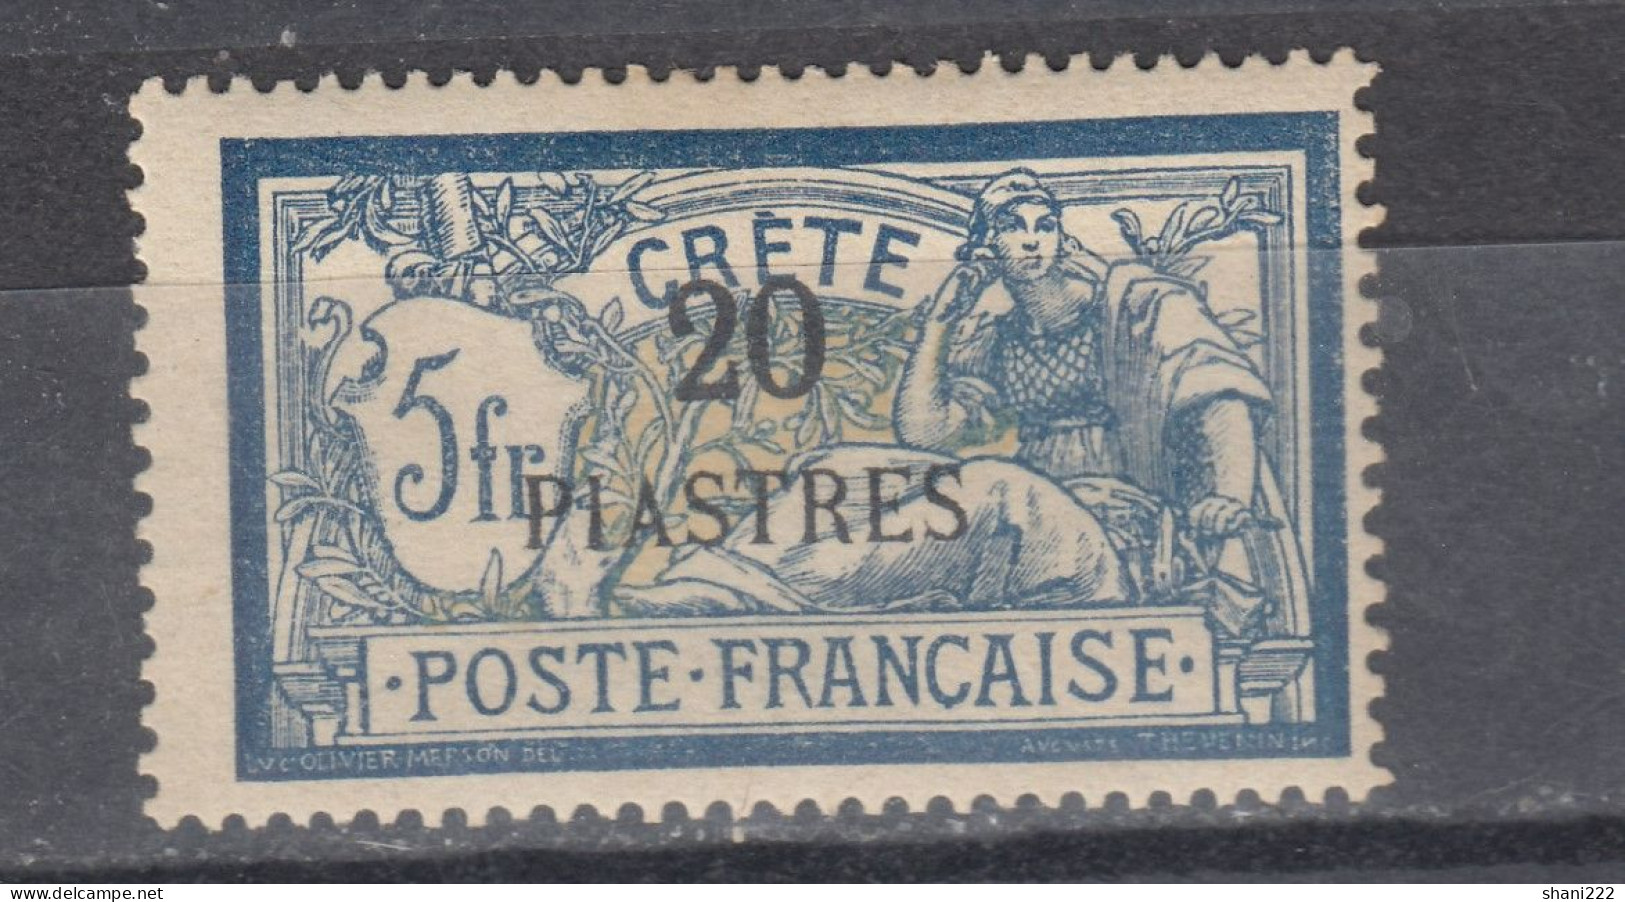 Crete 1903 - 20 Pt. Surcharge On 2 Fr. - MH (e-556) - Used Stamps